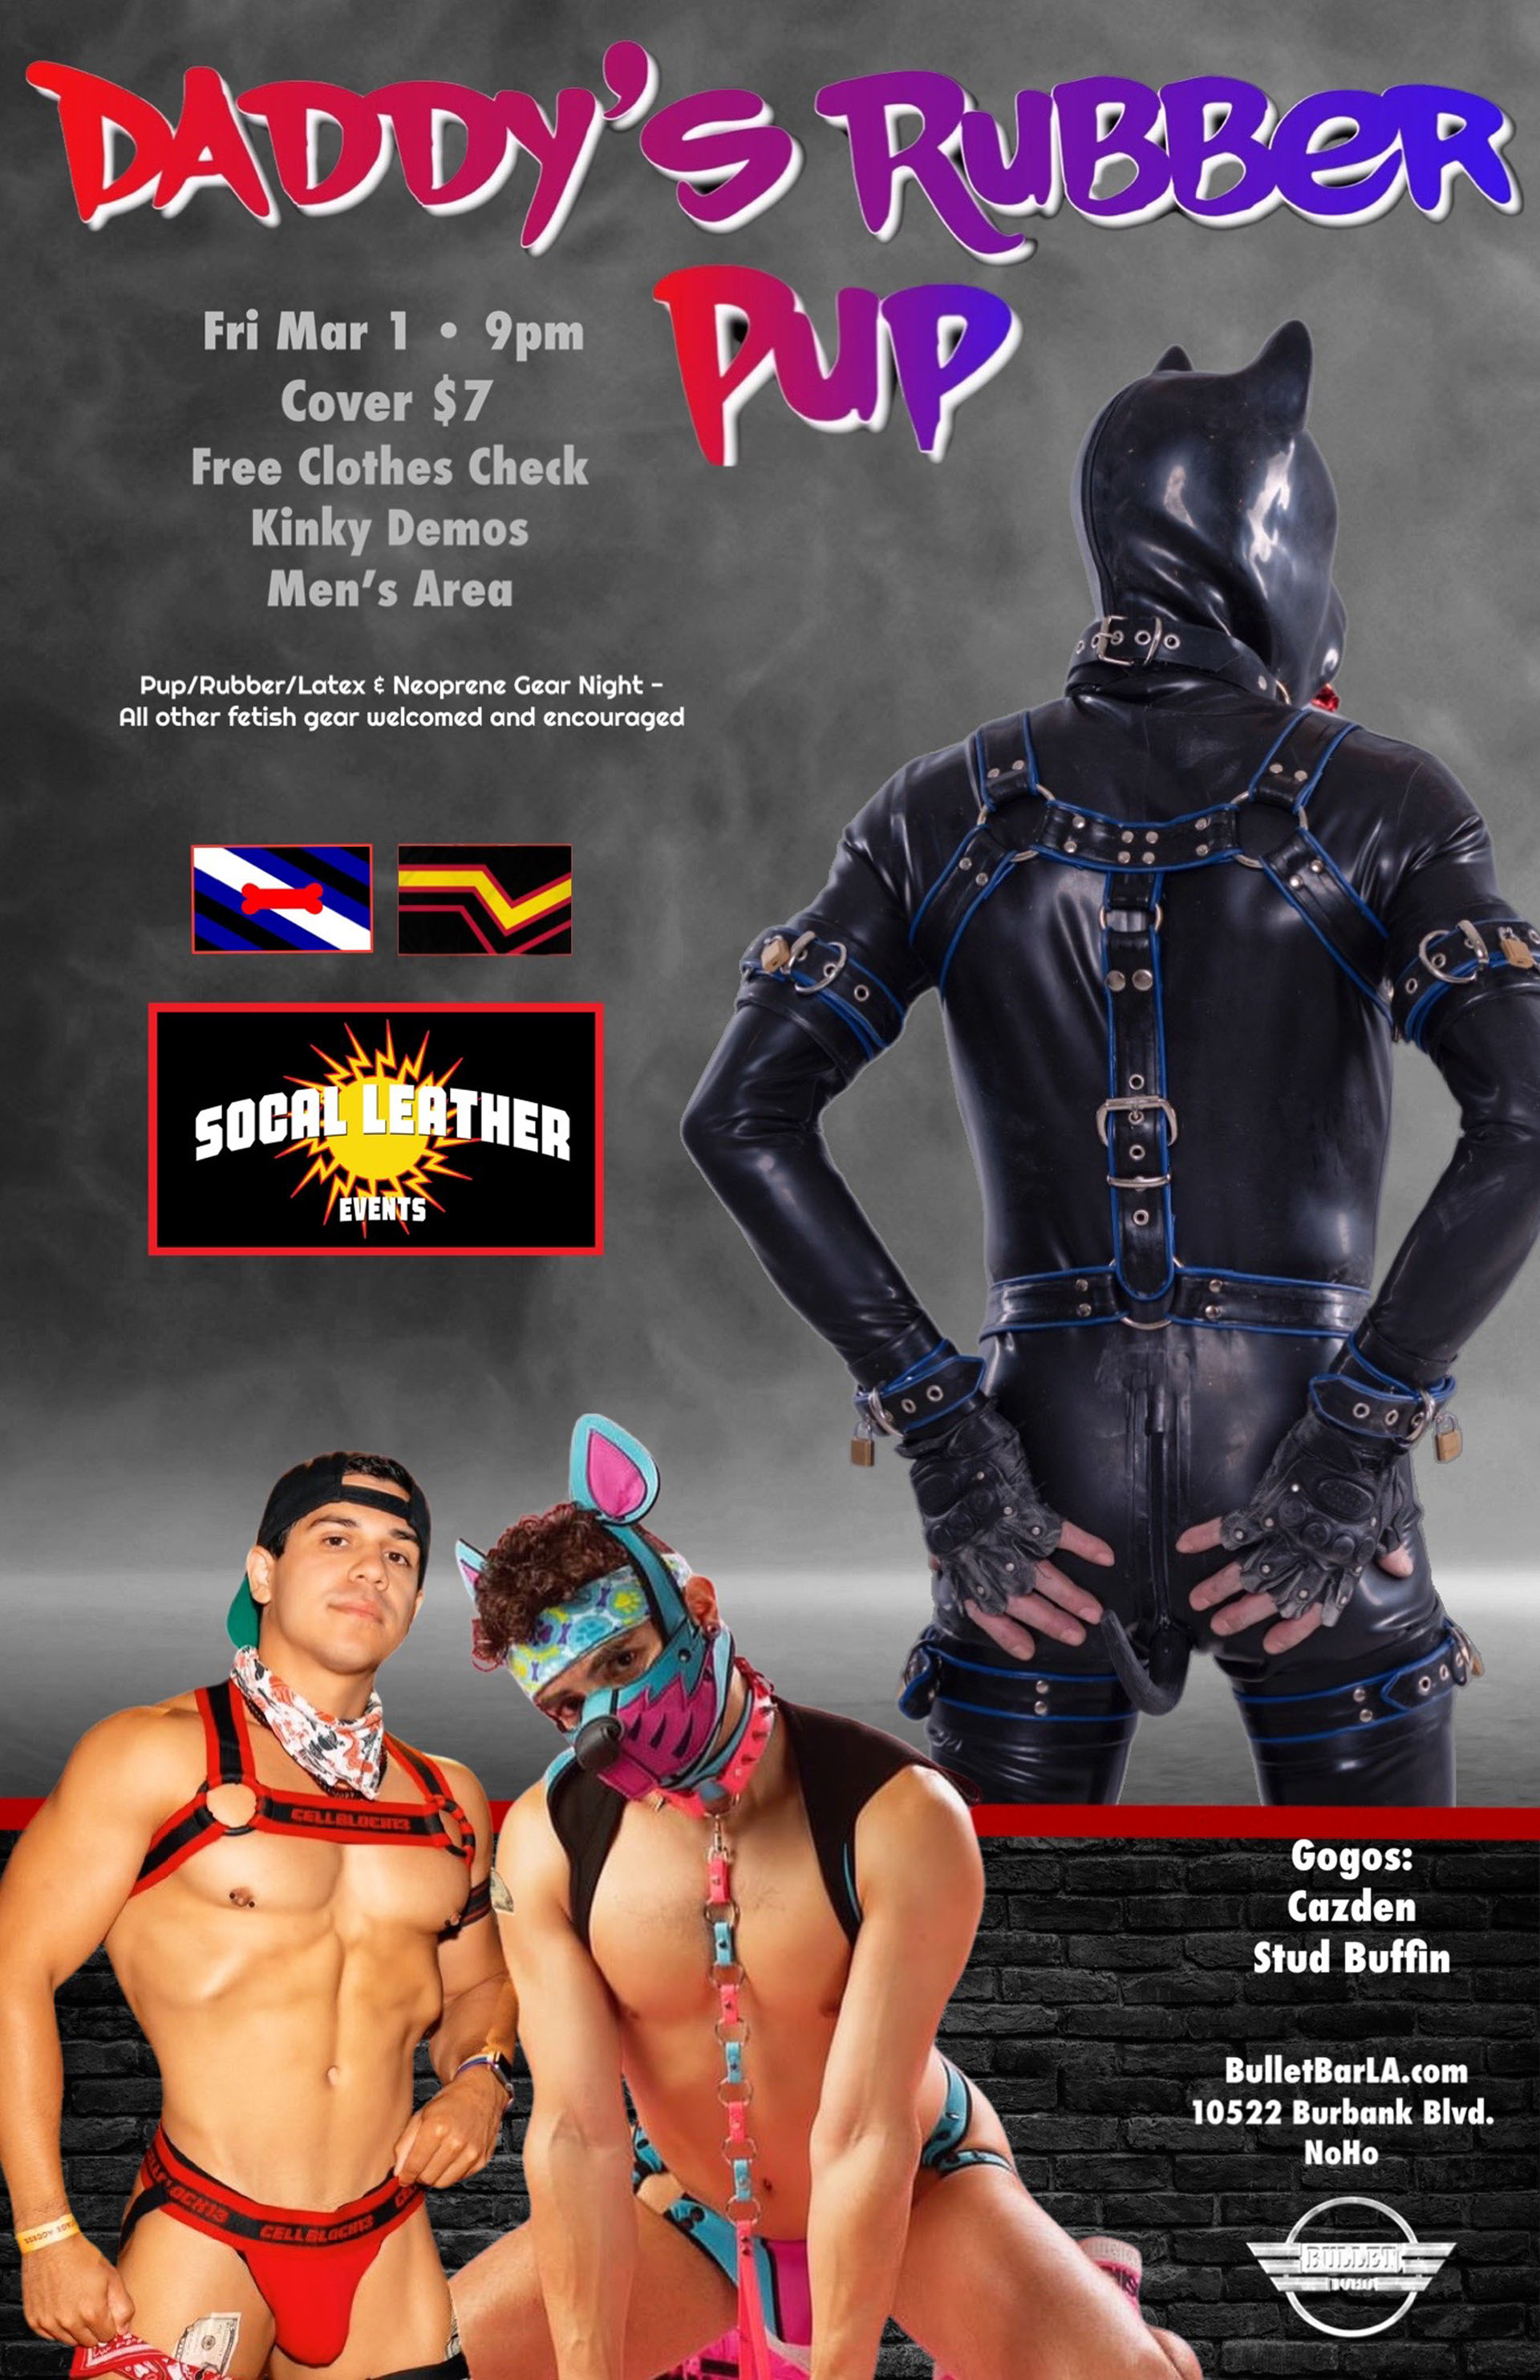 THE BULLET BAR and SOCAL LEATHER EVENTS Present DADDY'S RUBBER PUP: Friday, 03/01/24 at 9:00 PM. Free Clothes Check. KINKY DEMOS! Men's Area! $7 cover.